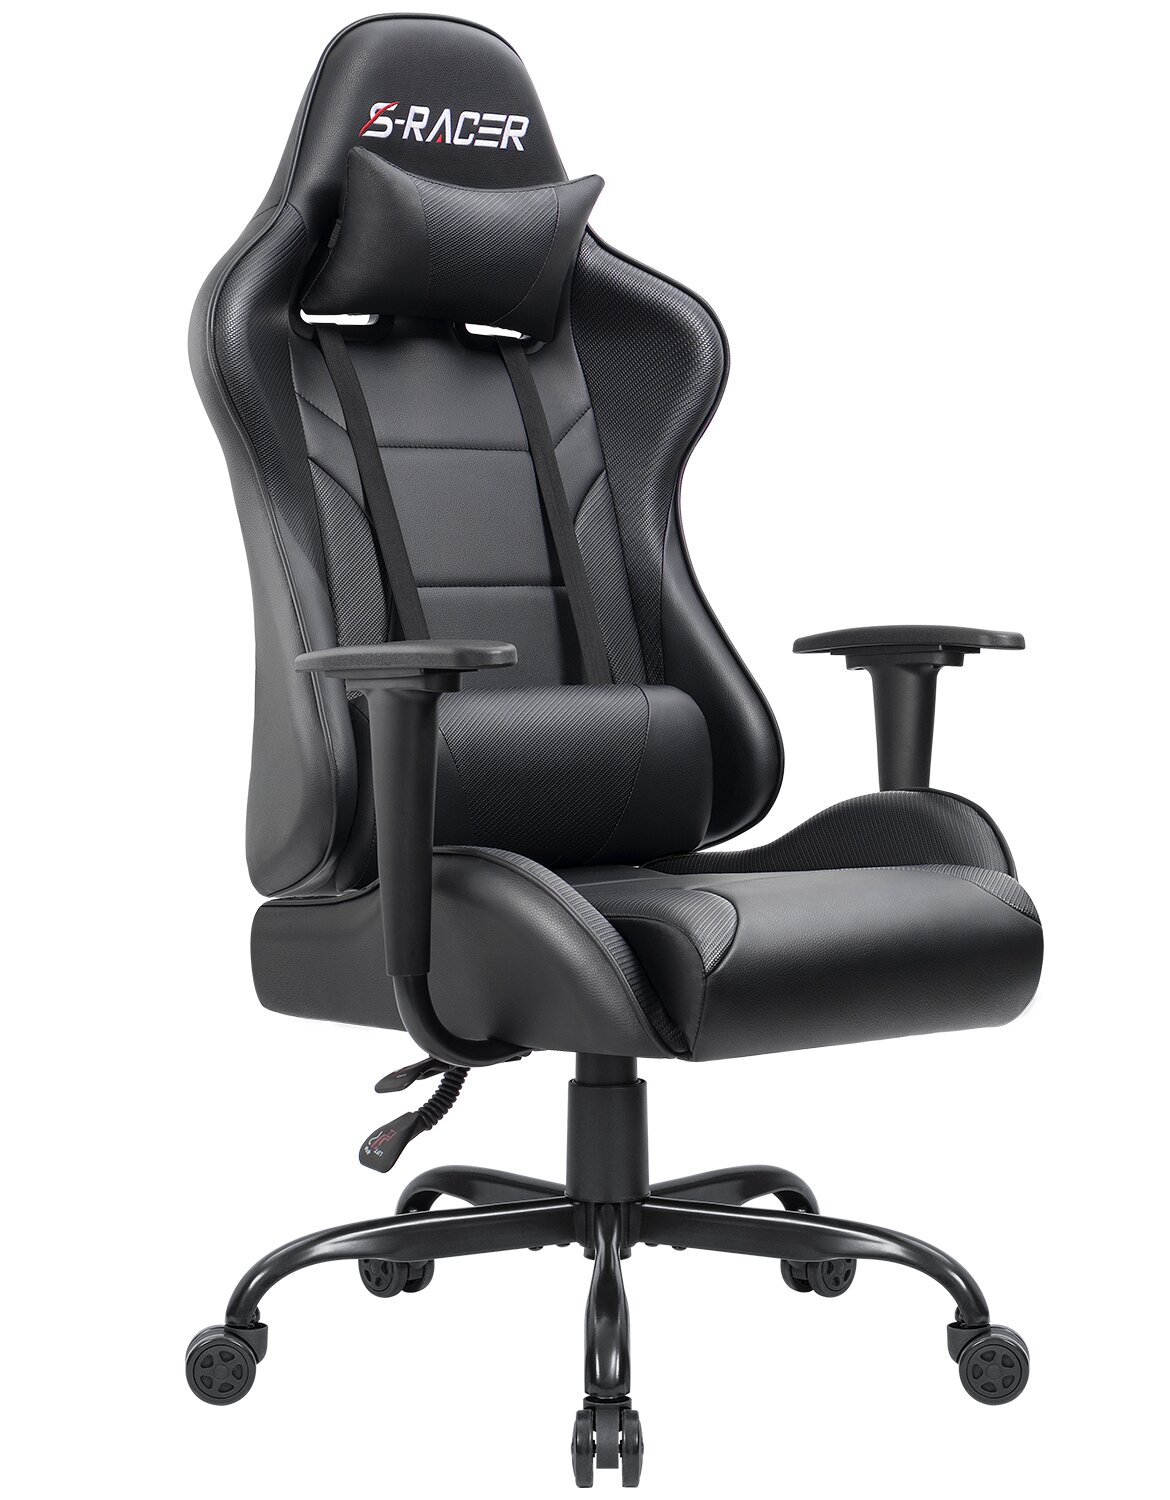 Video Game Chair Gaming Chair High Back Executive Office Chair Swivel Desk Chair 